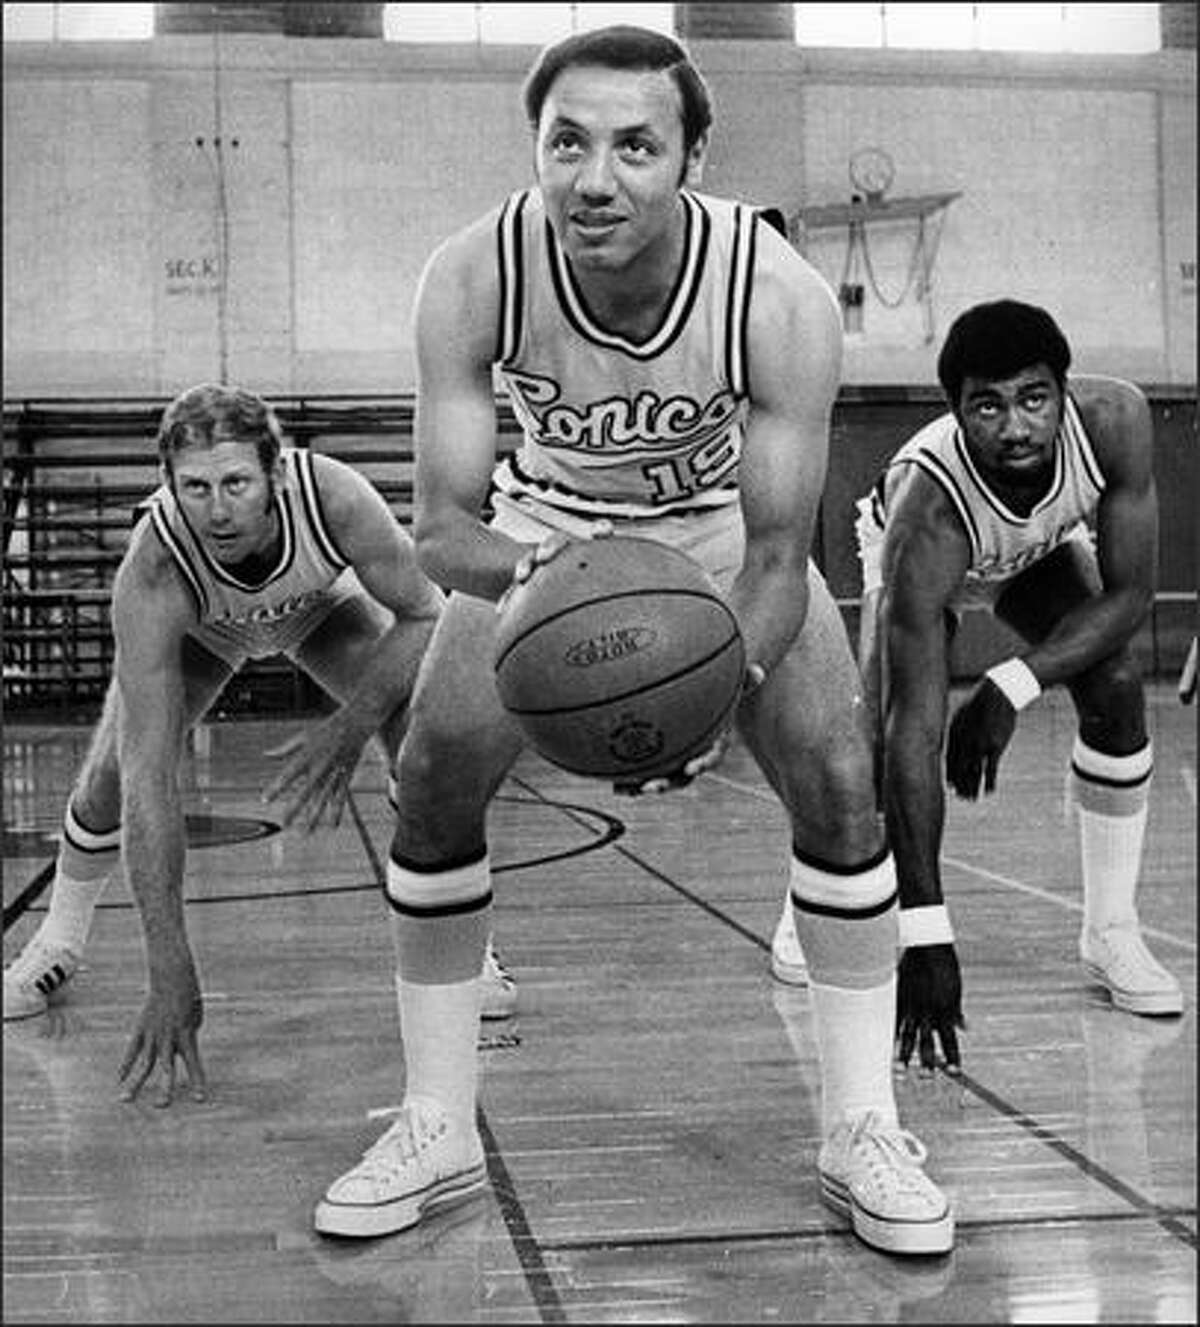 Seattle SuperSonics players Don Kojis, Lenny Wilkens and Garfield Heard in this September, 1970 P-I photo. (Seattle Post-Intelligencer photo)